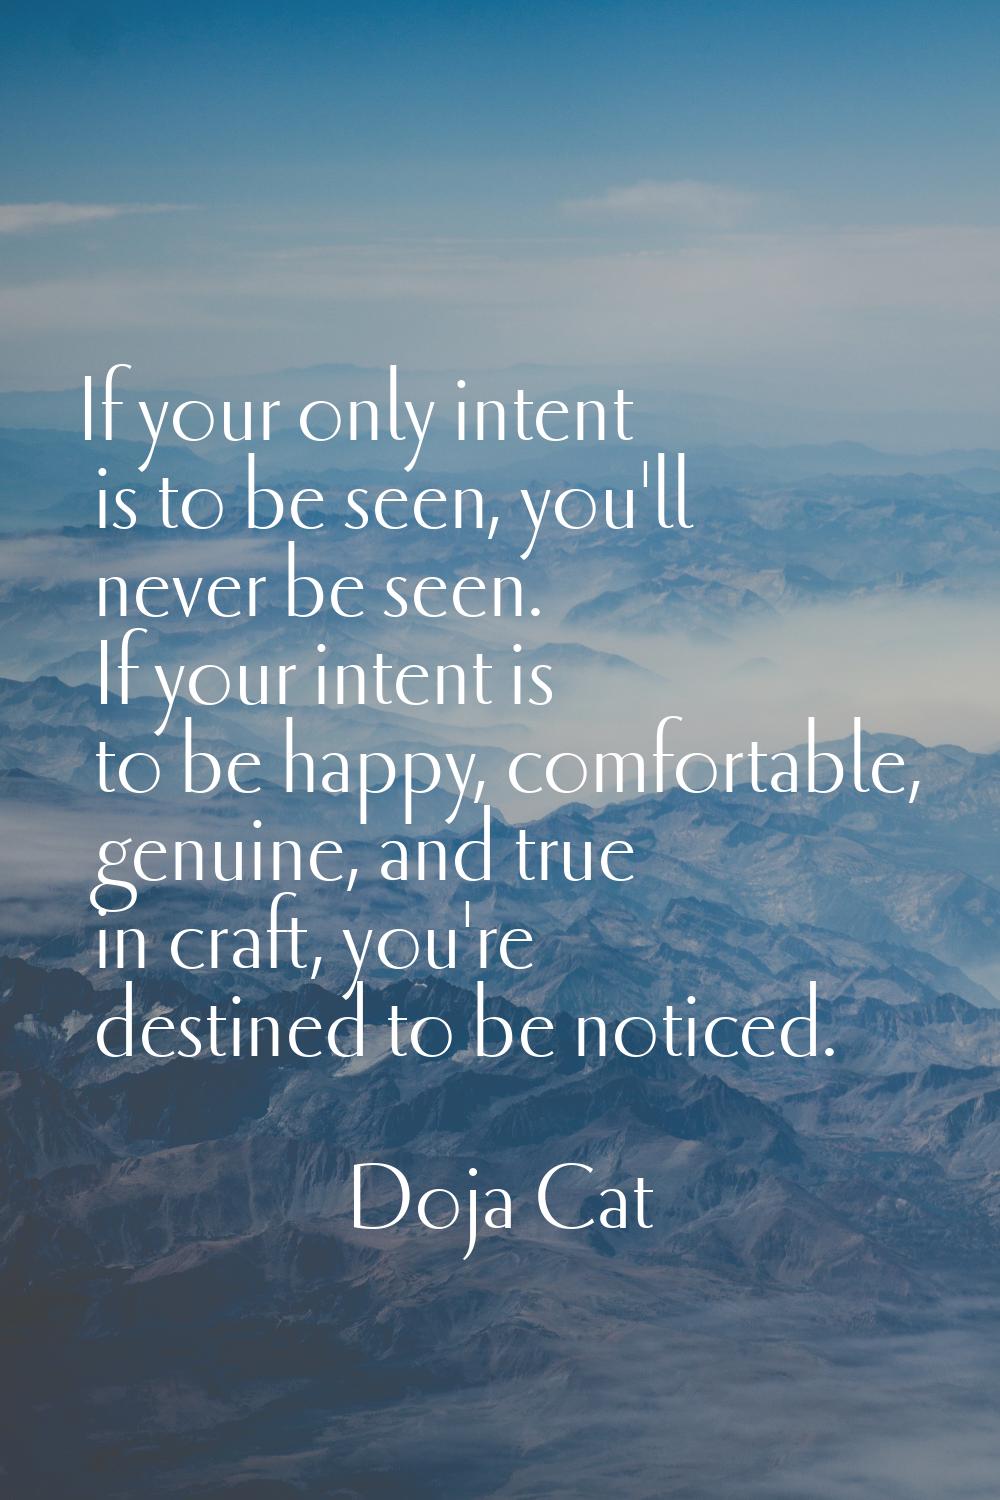 If your only intent is to be seen, you'll never be seen. If your intent is to be happy, comfortable